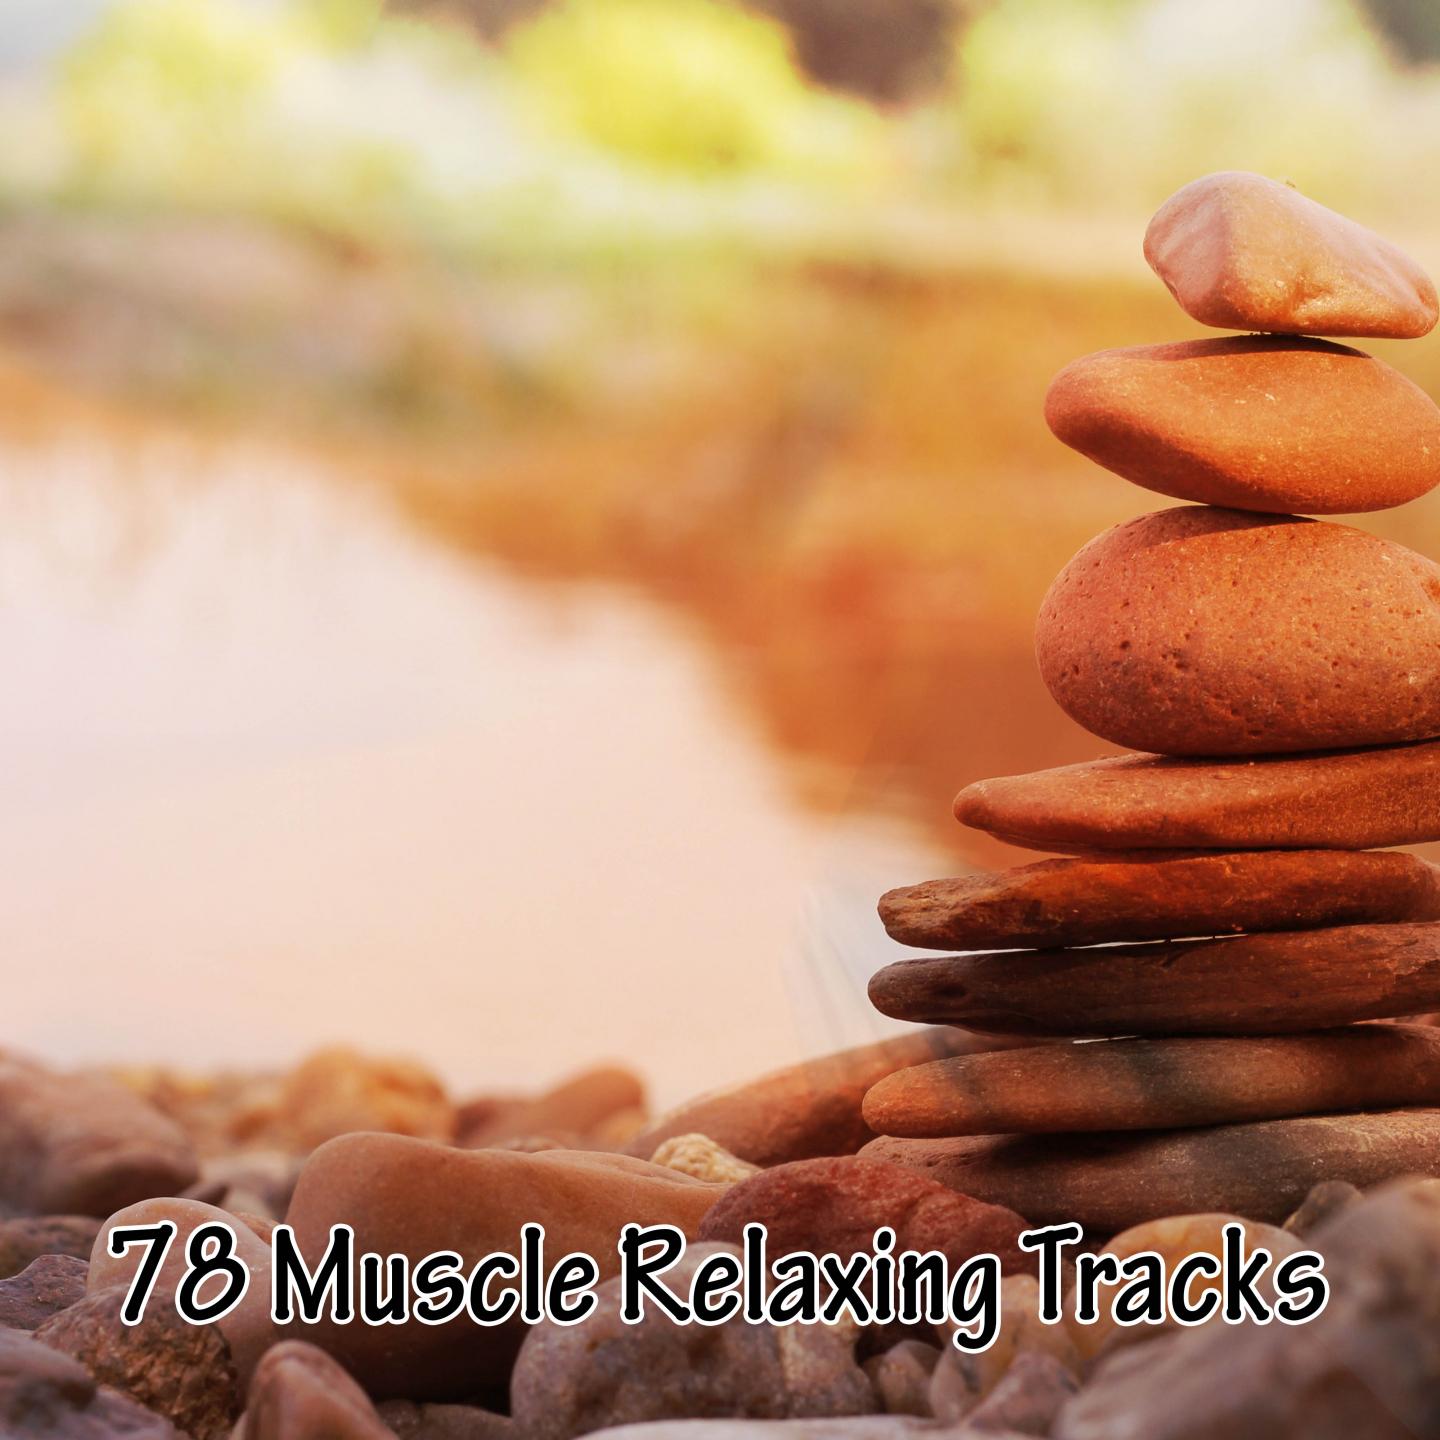 78 Muscle Relaxing Tracks